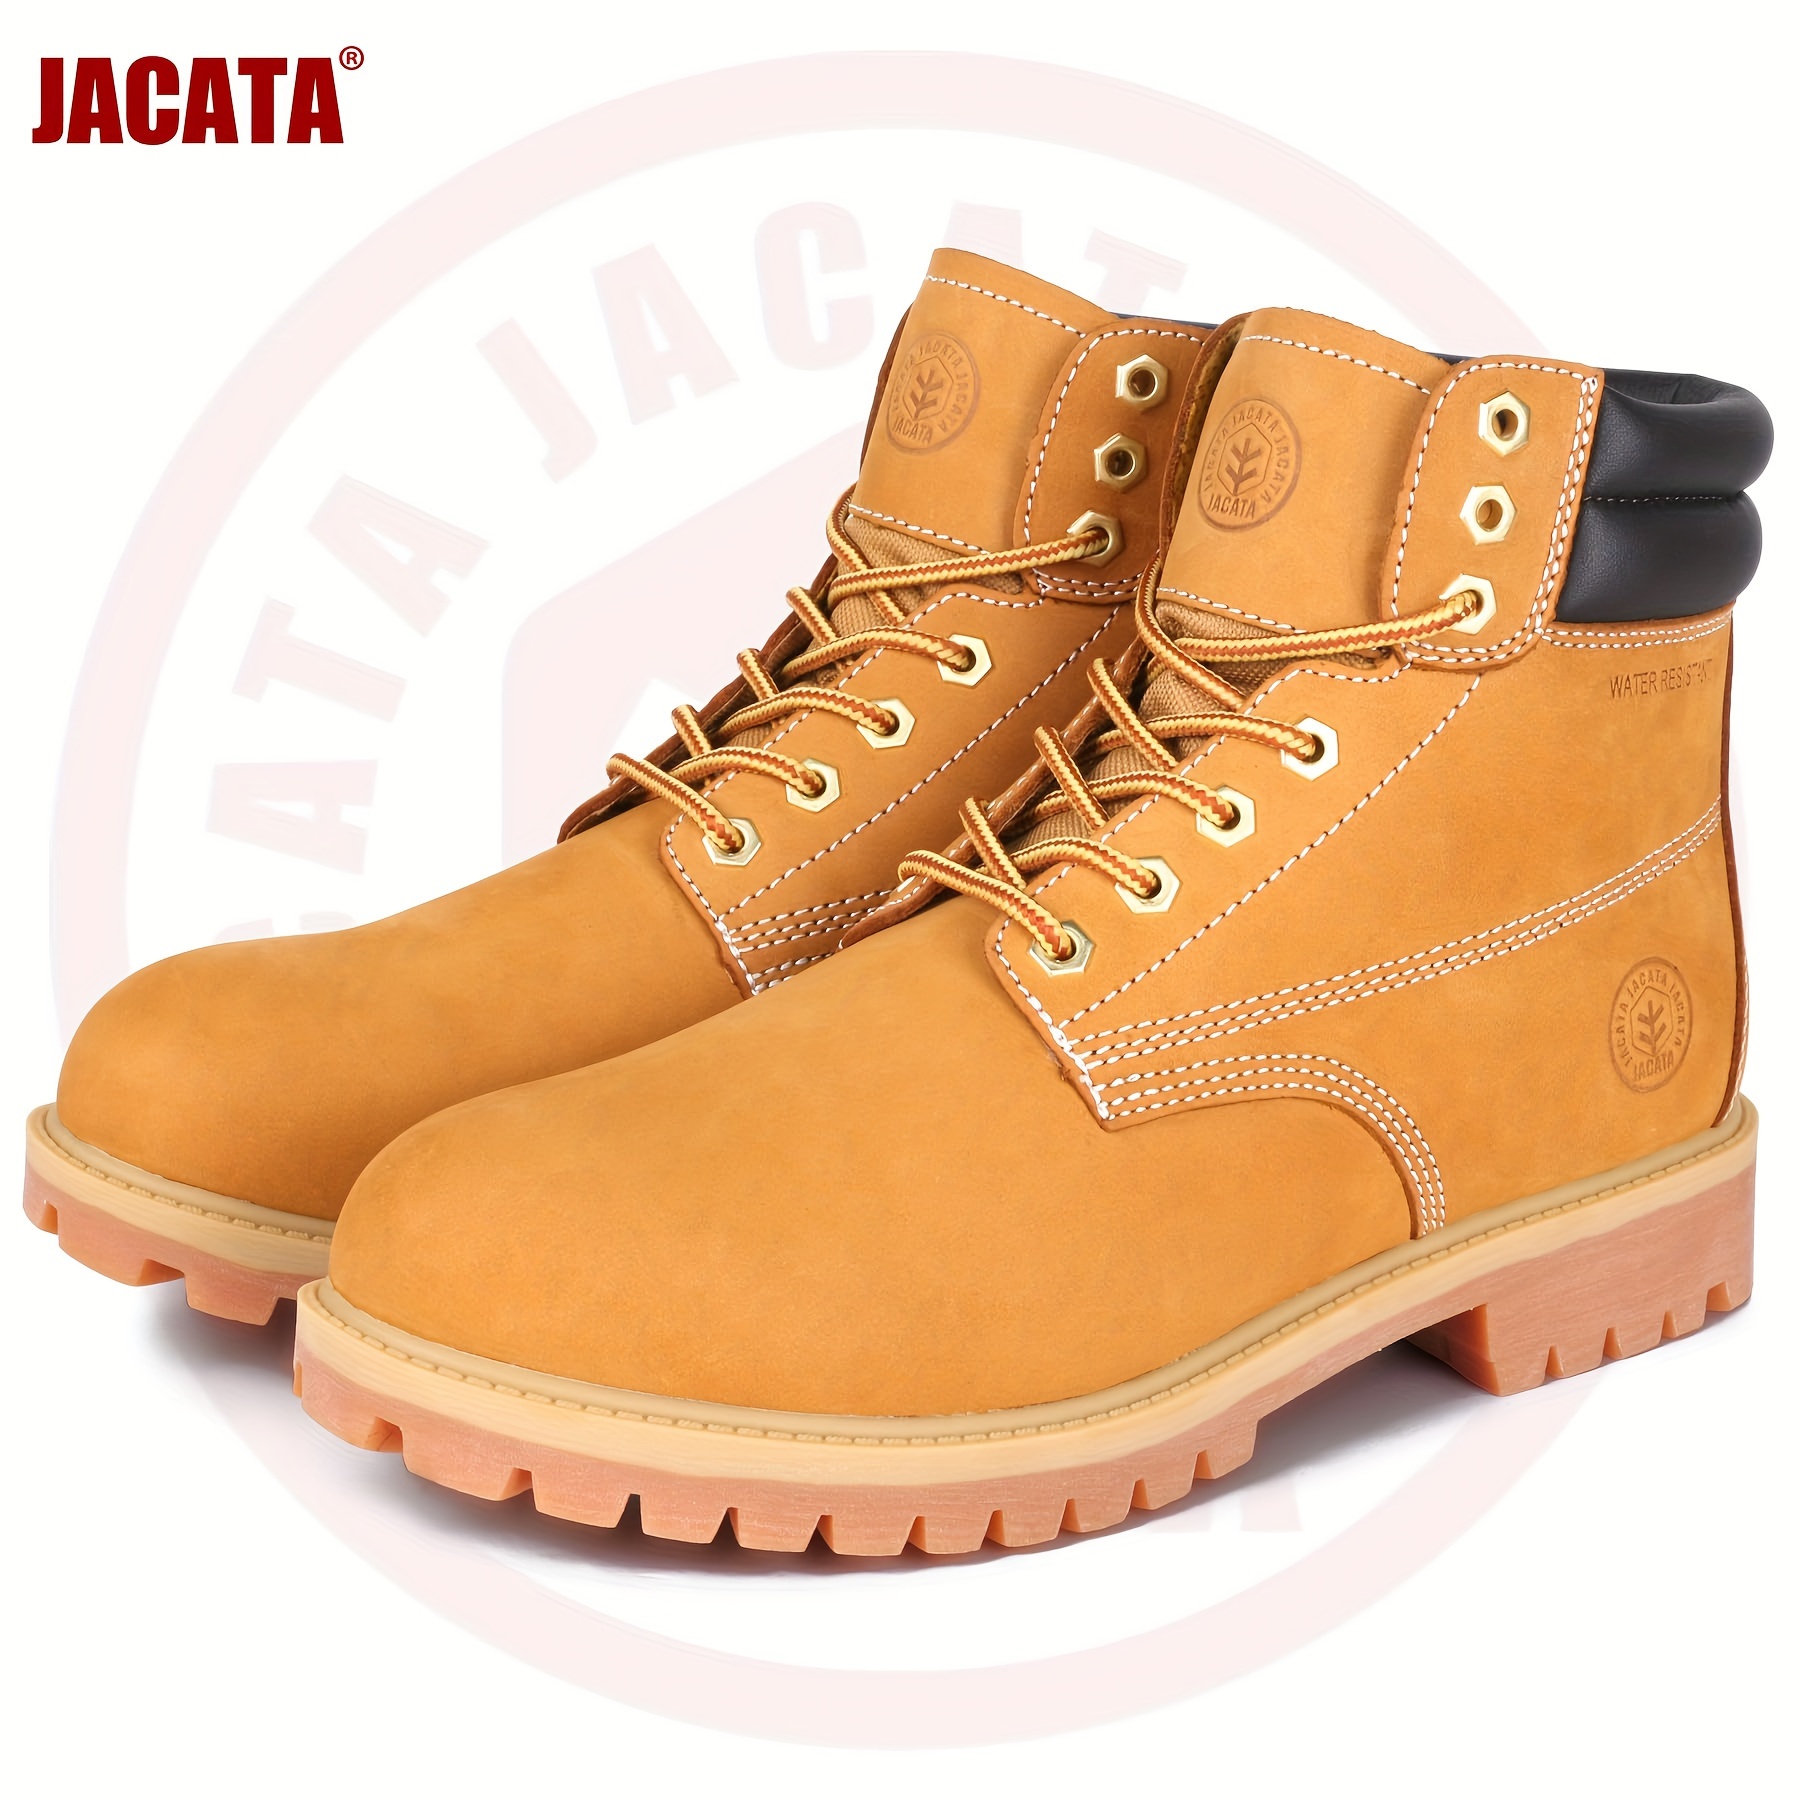 

Men's Water Resistant Leather Work Boot Rubber Sole Construction Oil Resistant Utility Industrial Boots